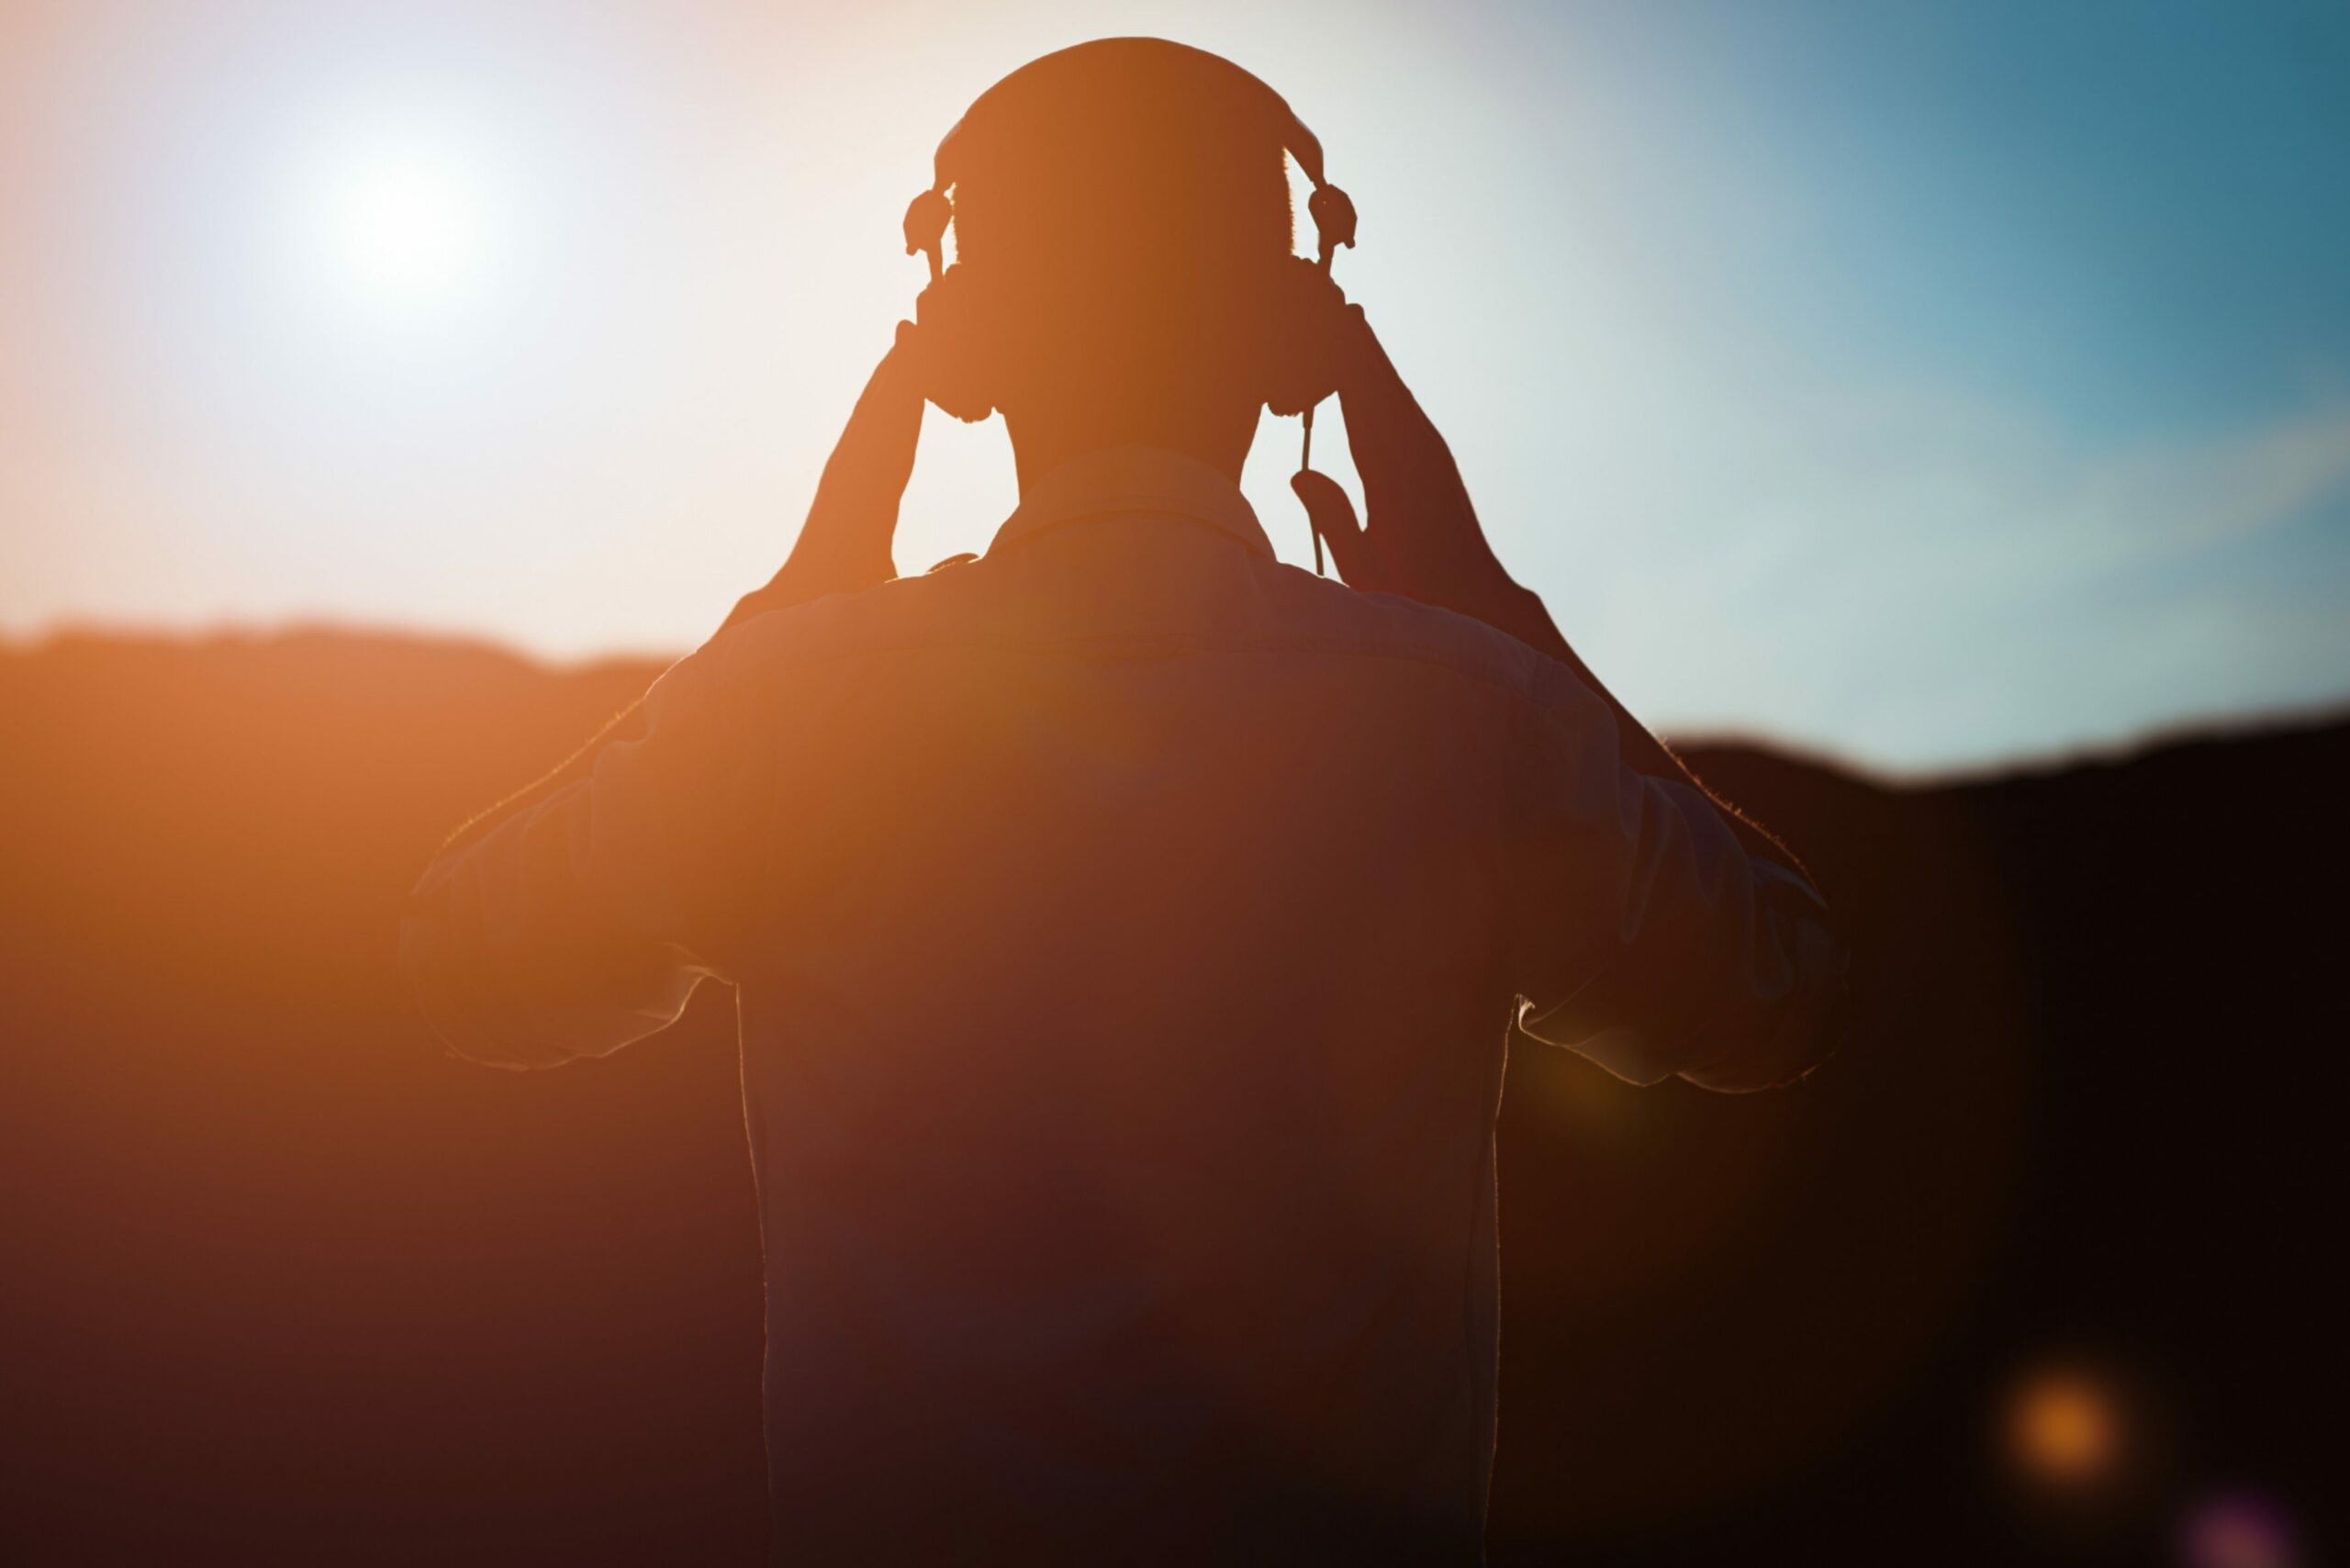 Man listening to music with headphones on.